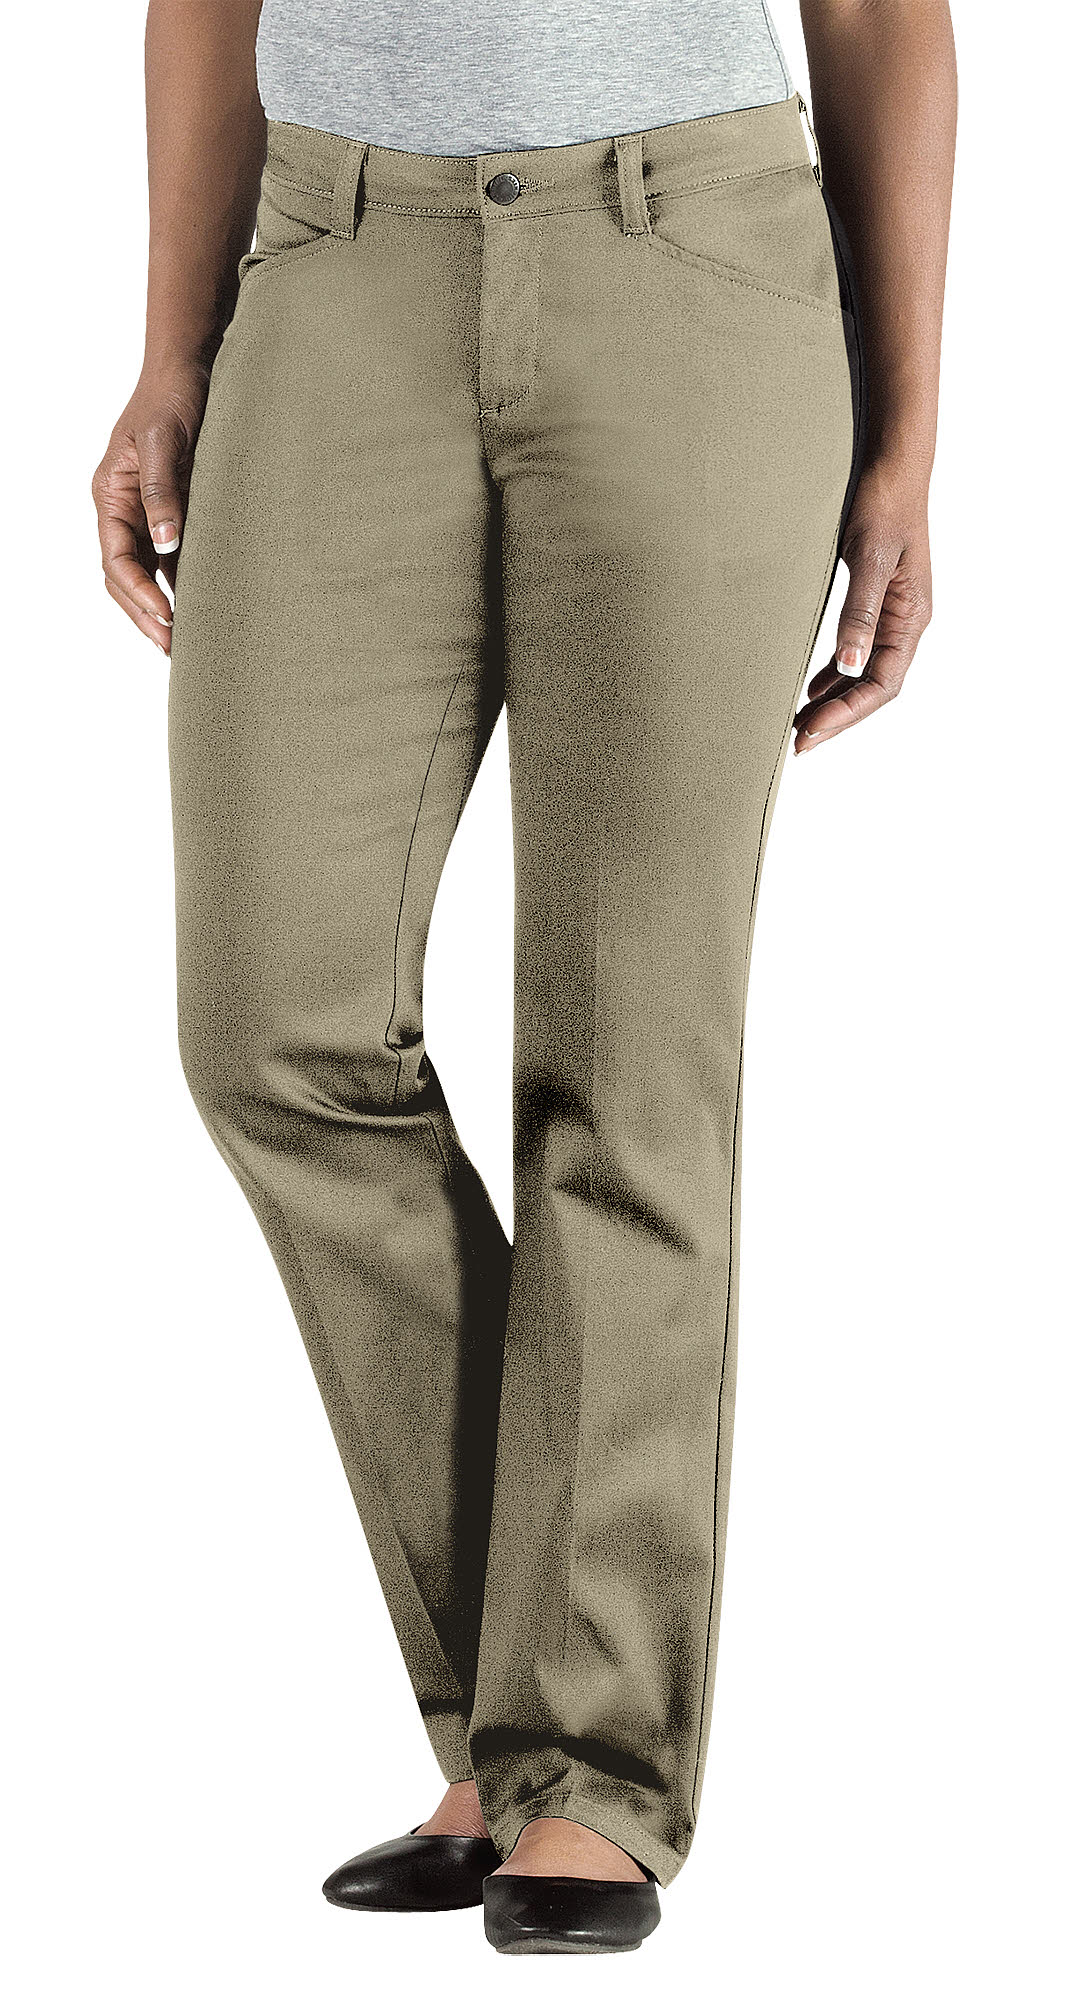 Women's Pants Archives - Corporate Cleaners & Laundry